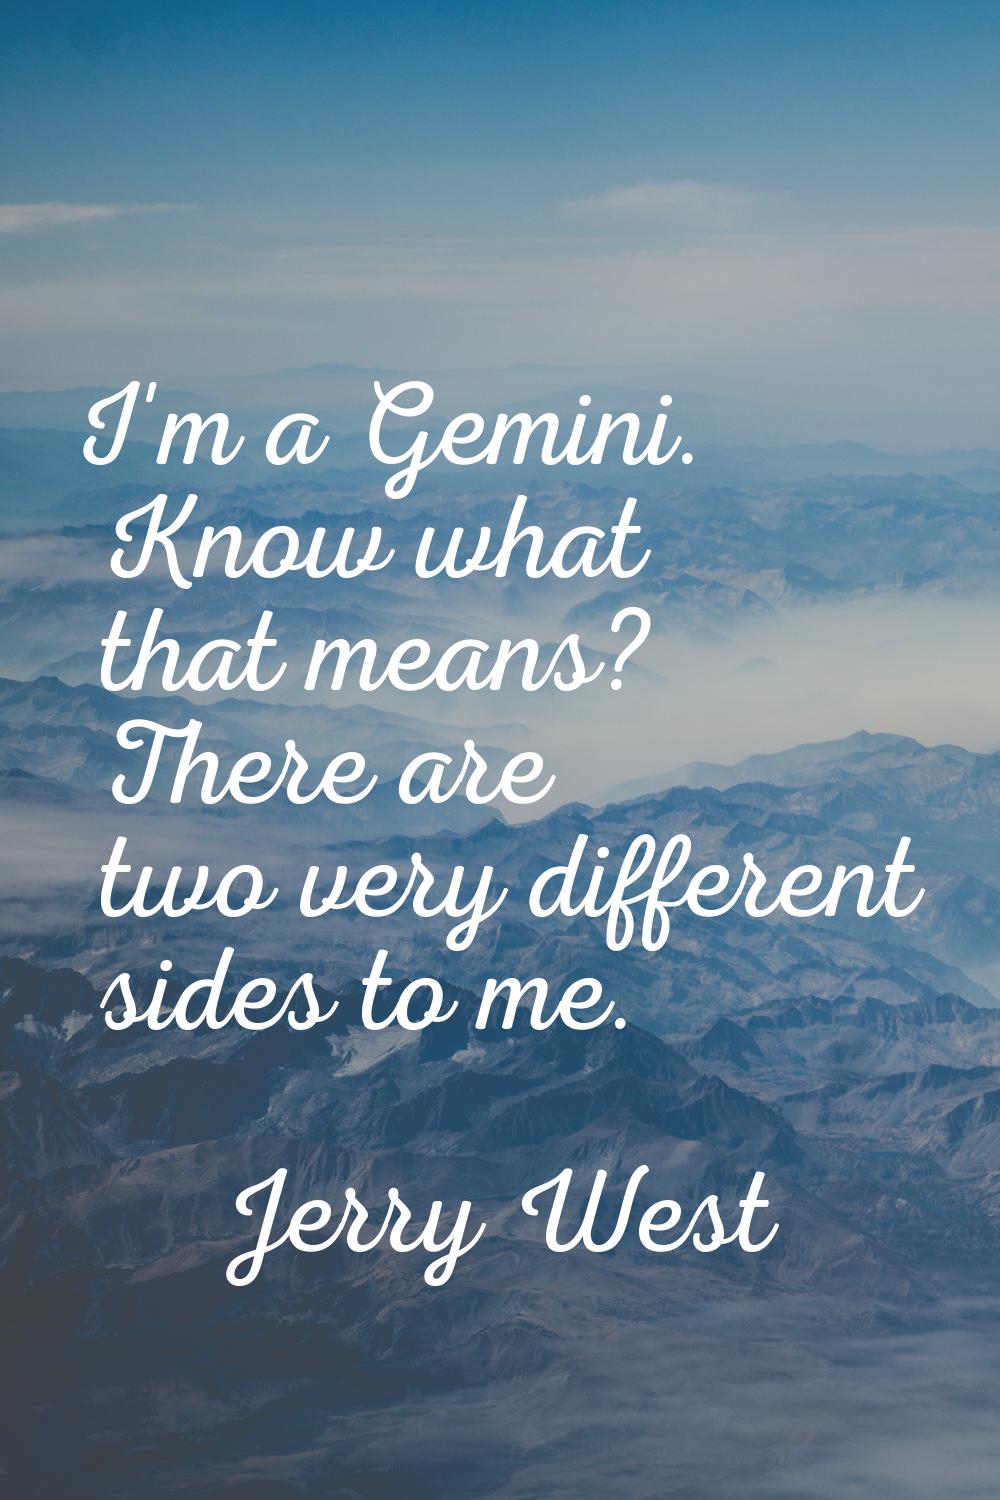 I'm a Gemini. Know what that means? There are two very different sides to me.